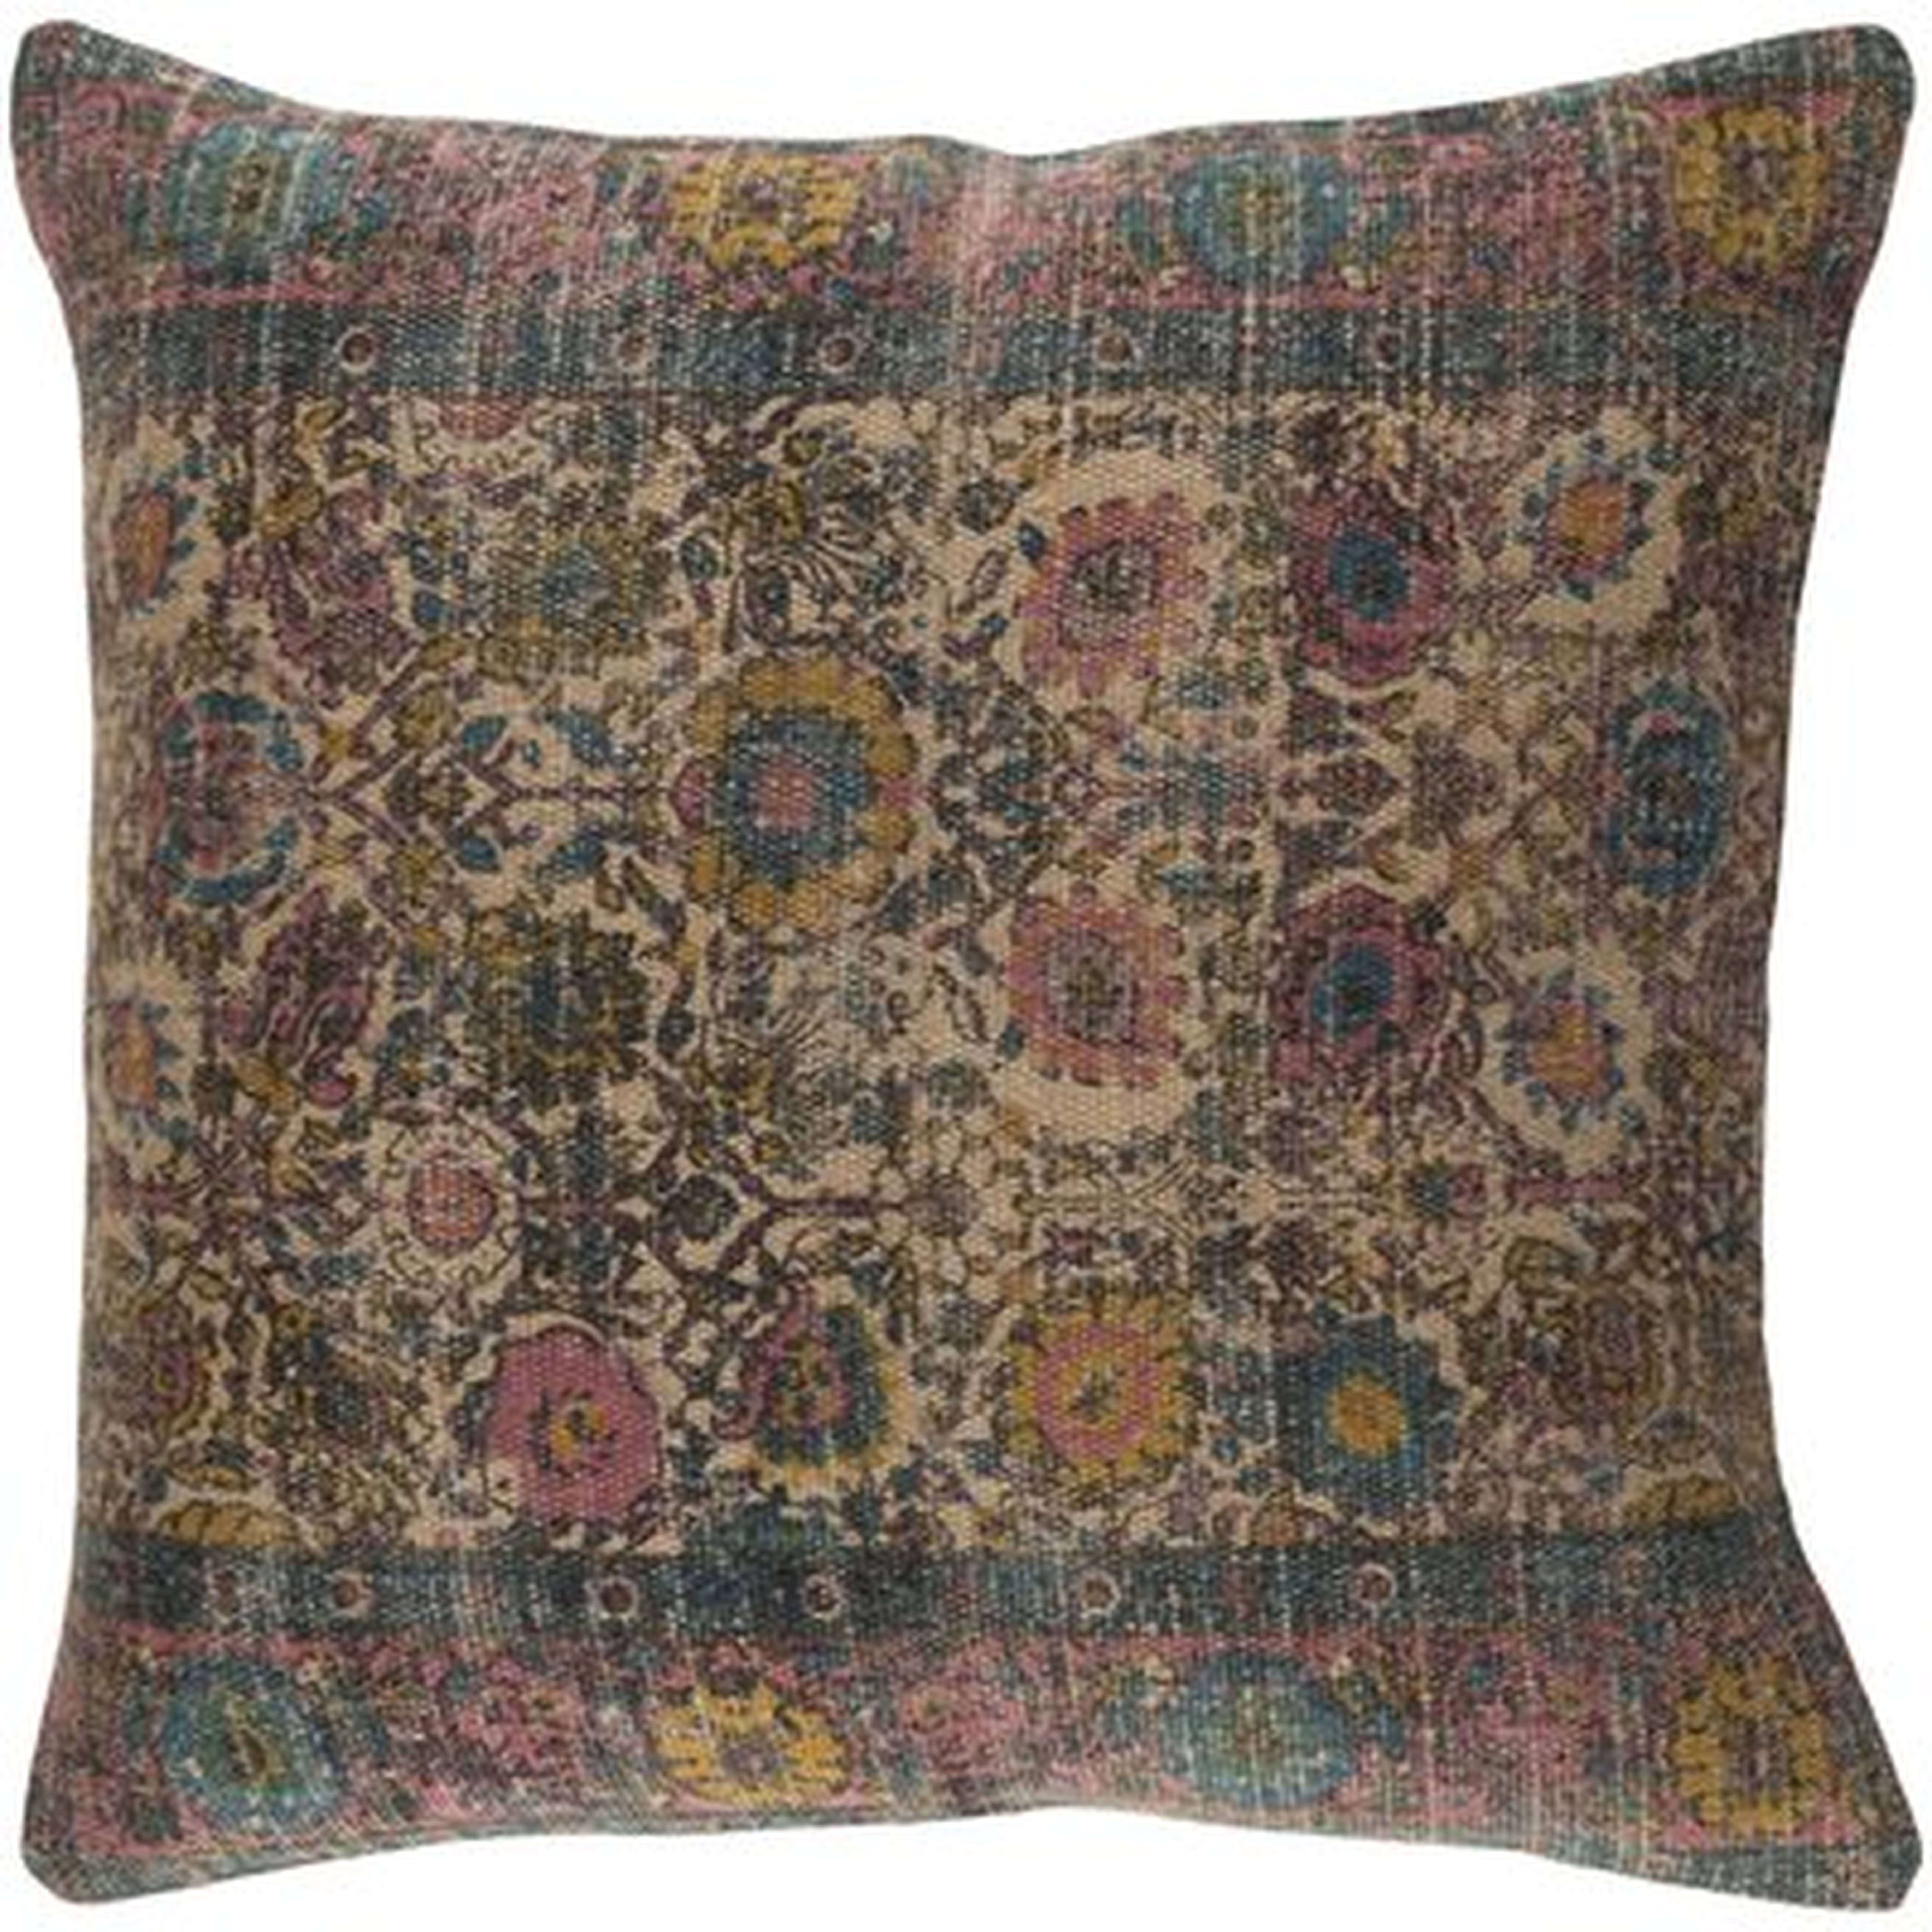 Middlesbrough Floral Throw Pillow Cover - Birch Lane